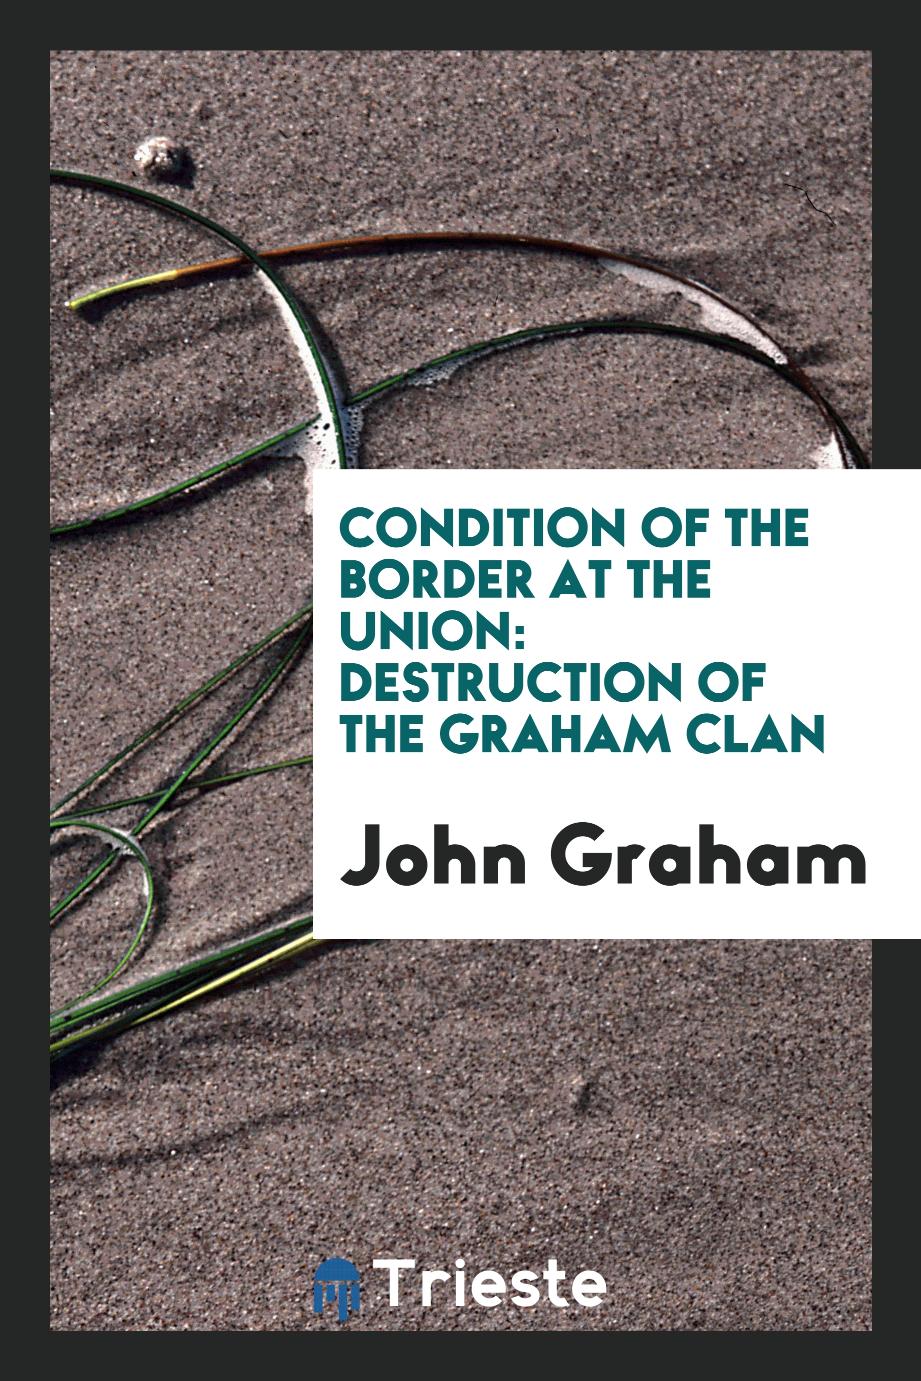 Condition of the Border at the union: destruction of the Graham clan